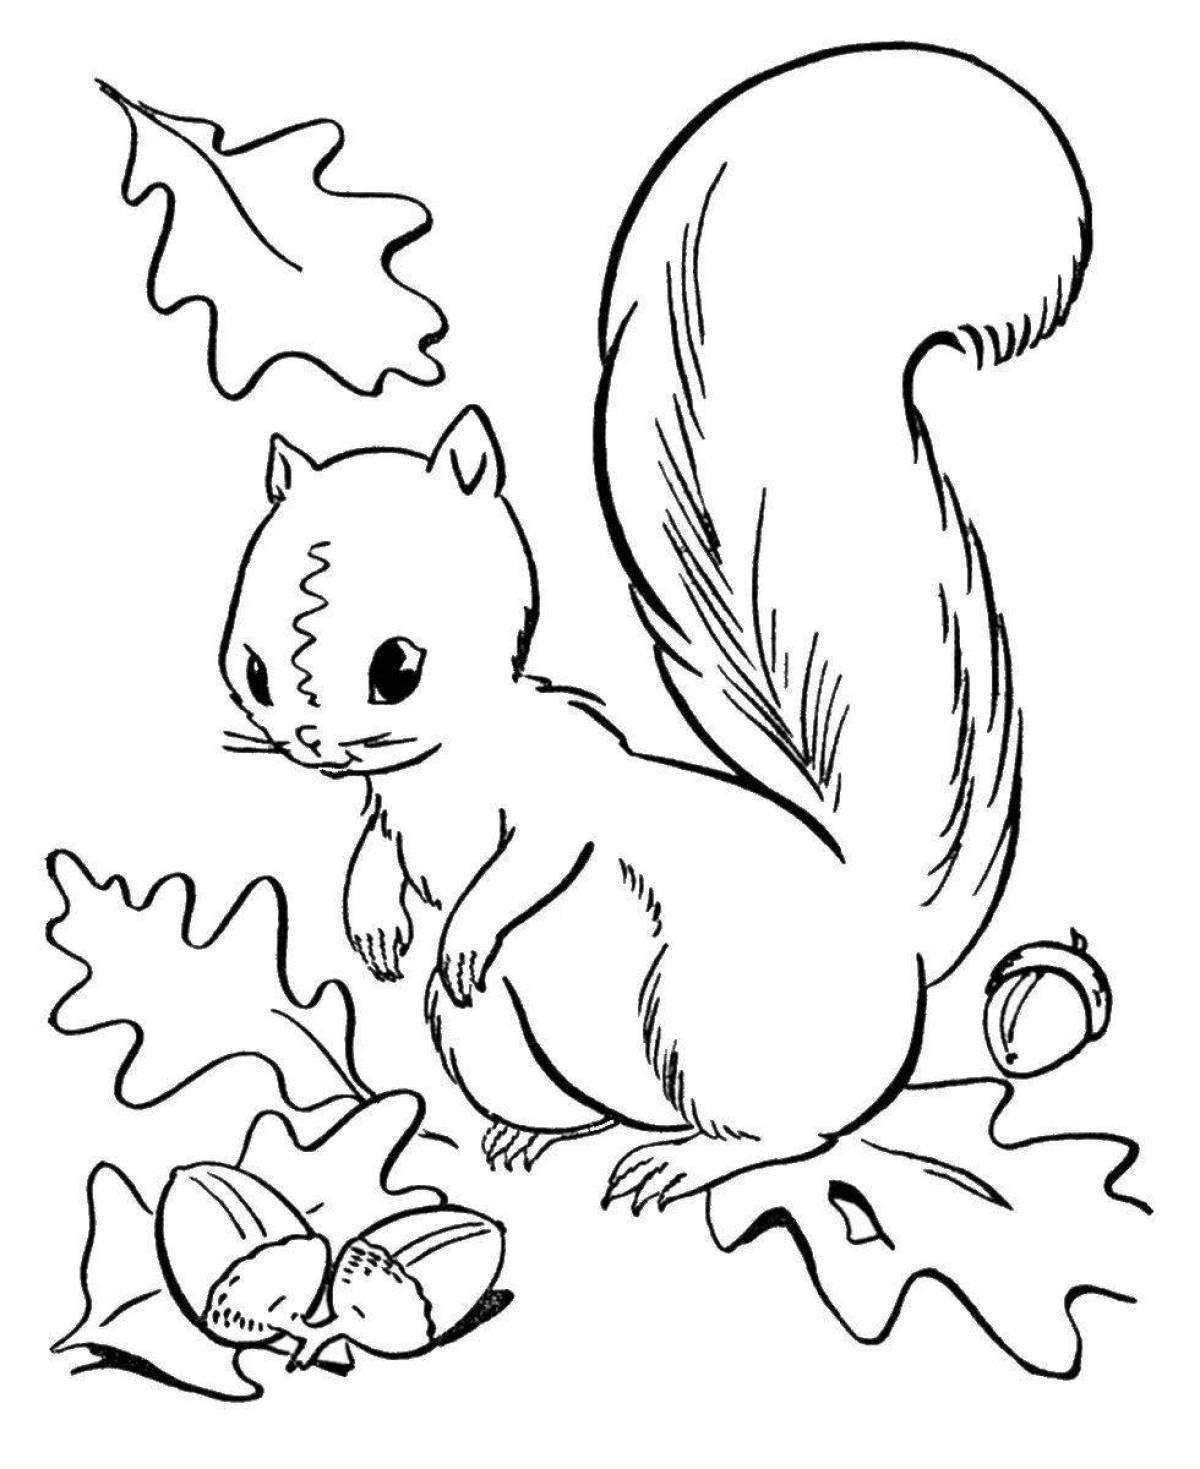 Bright squirrel coloring book for children 4-5 years old